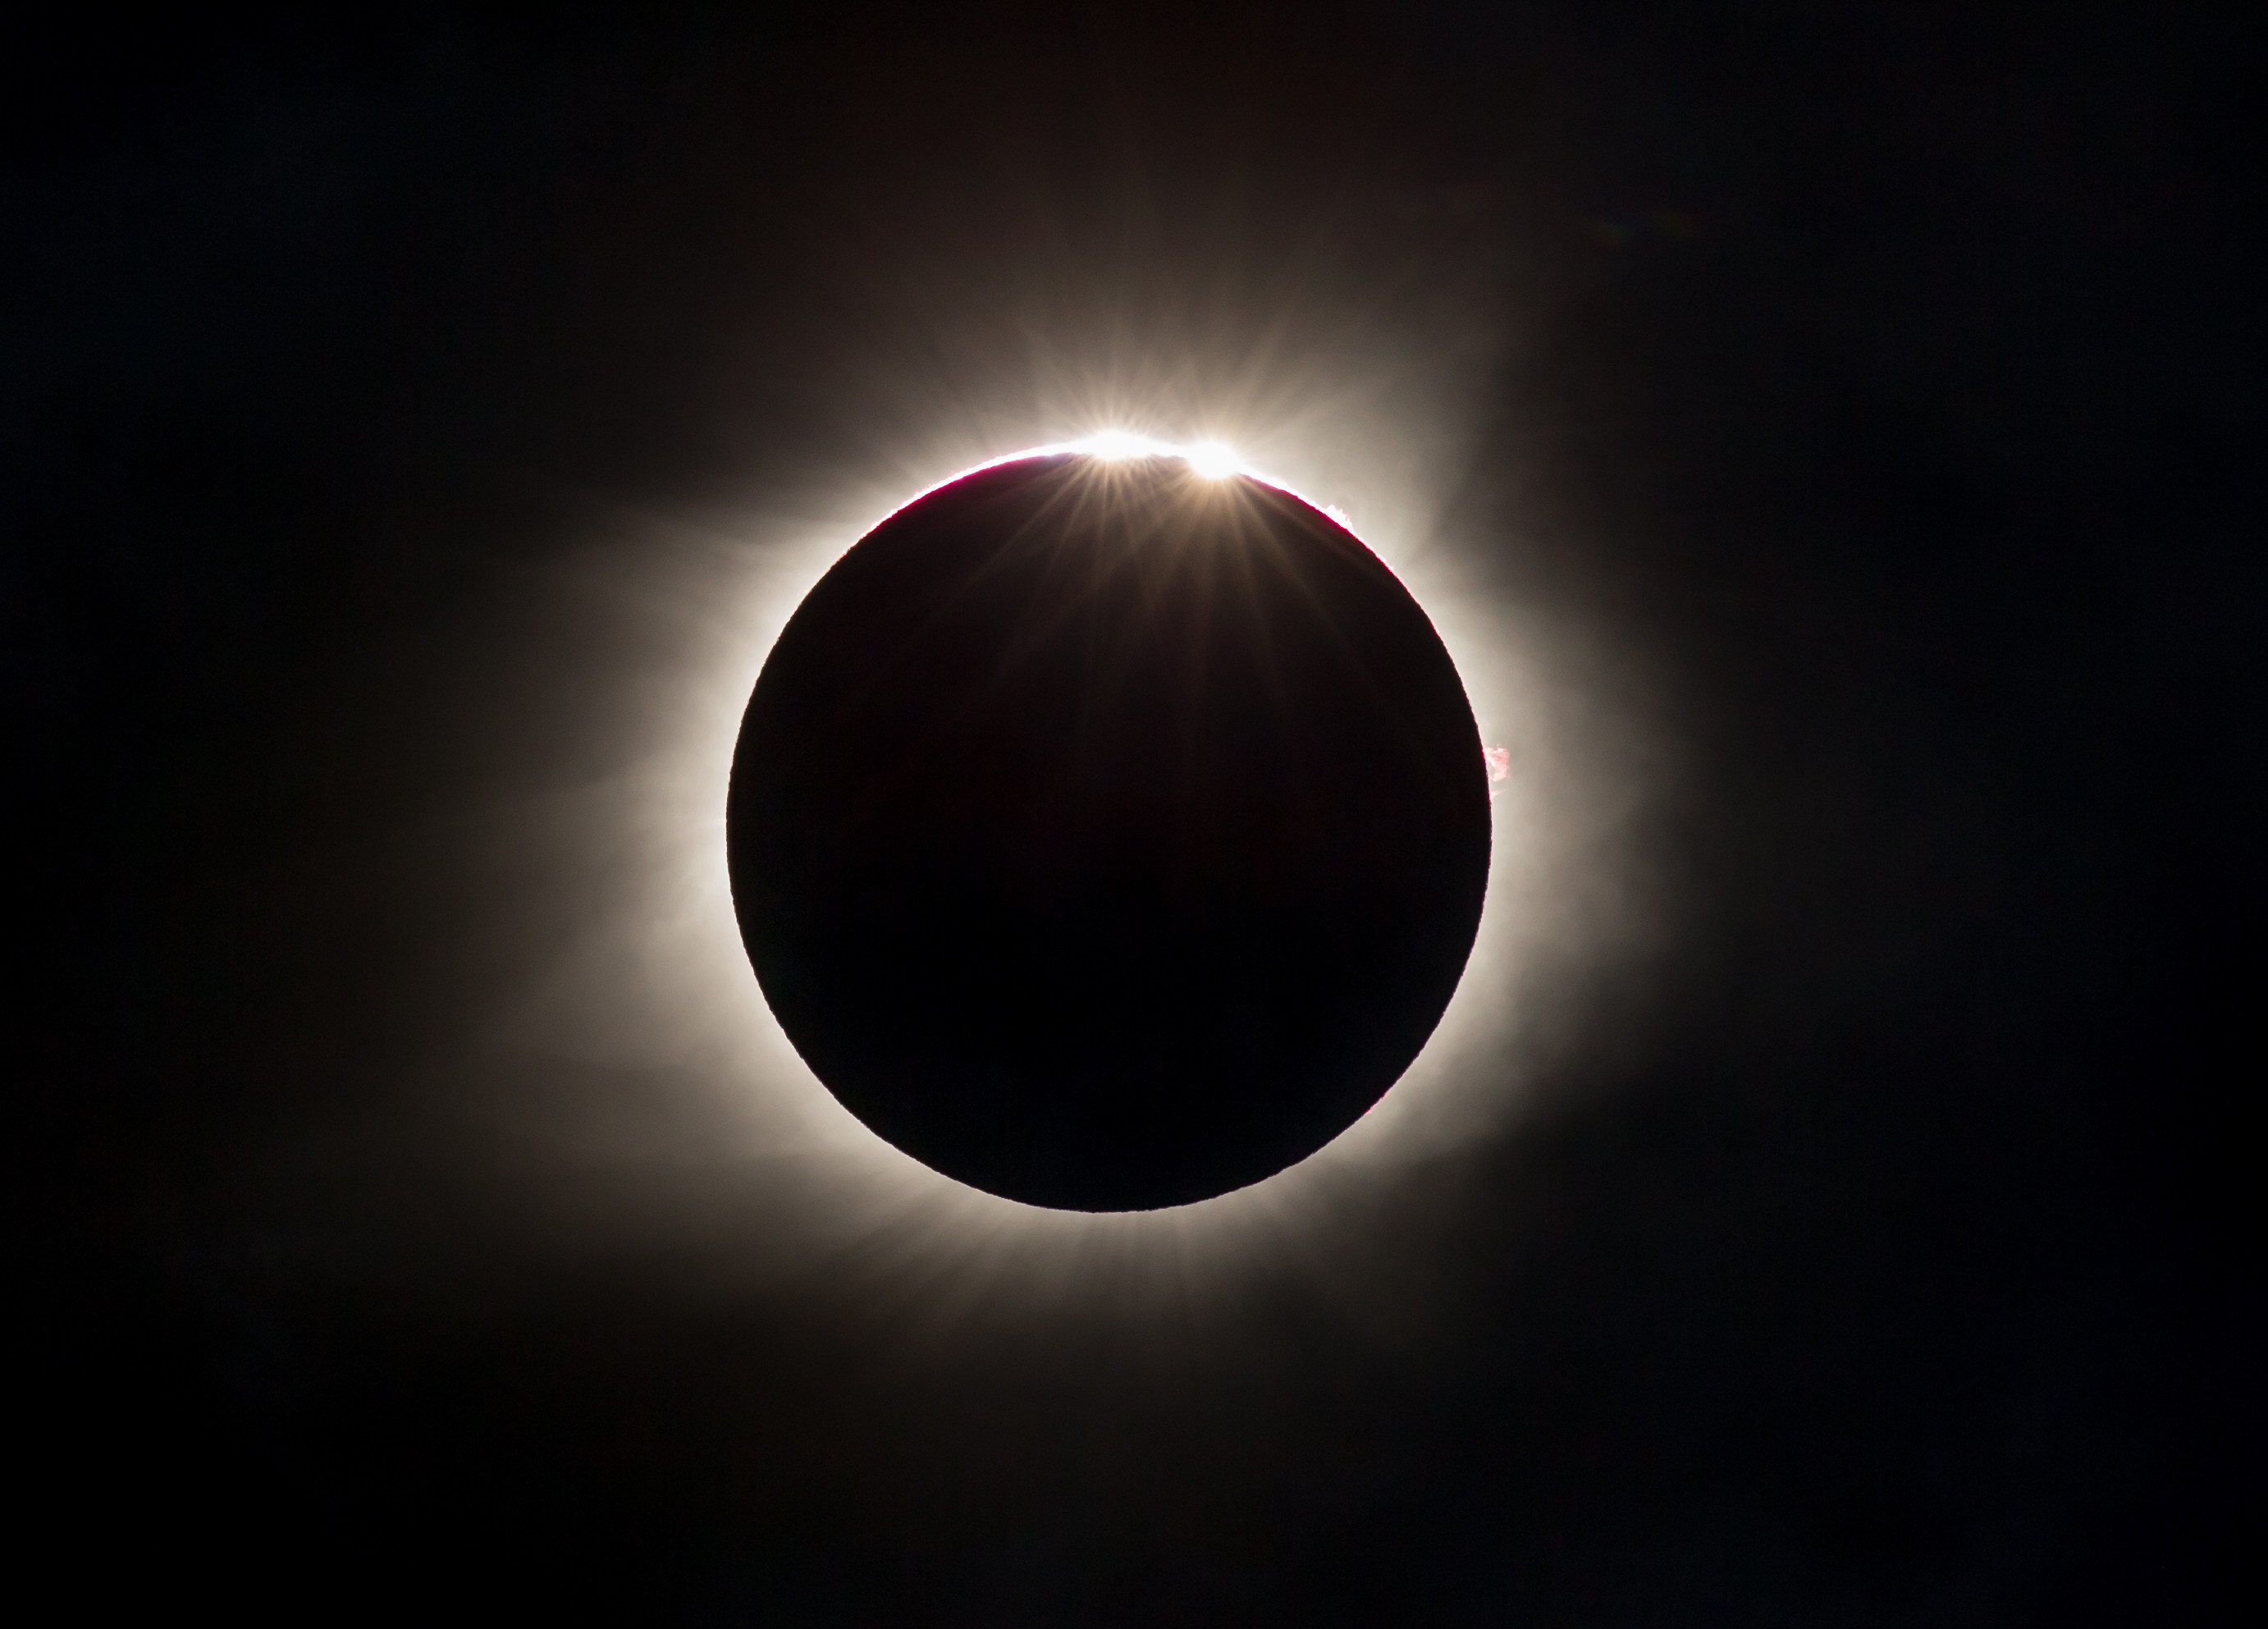 Baily’s beads are visible during the Great American Eclipse - a total solar eclipse - viewed from a location in the US state of North Carolina on August 21, 2017. Photo: Shutterstock